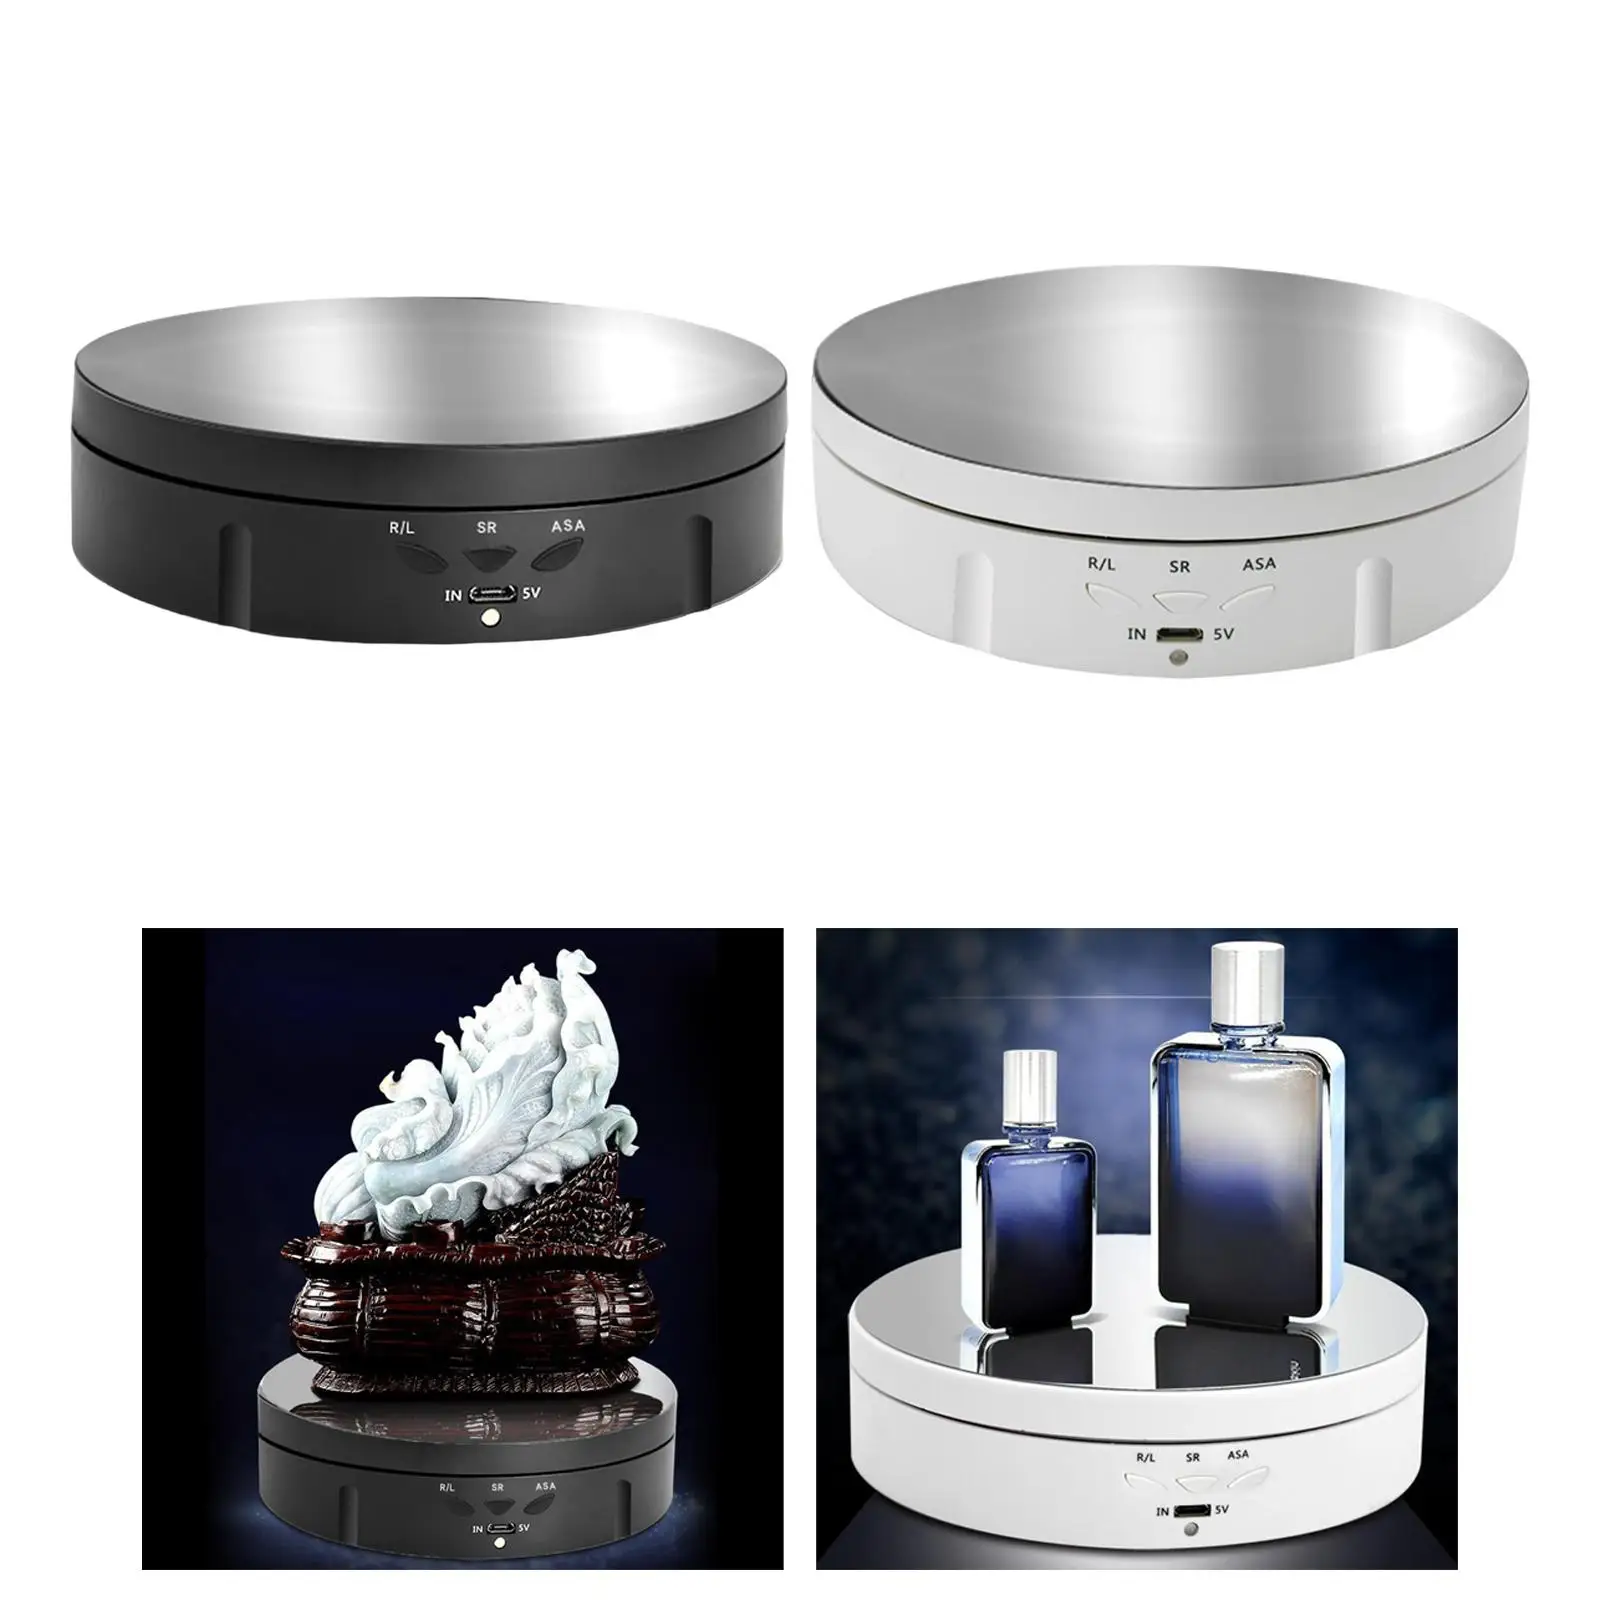 Motorized Rotating Display Stand with USB Power Cable Rotating Turntable Jewelry Holder for Jewelry 3D Models Watch Cake